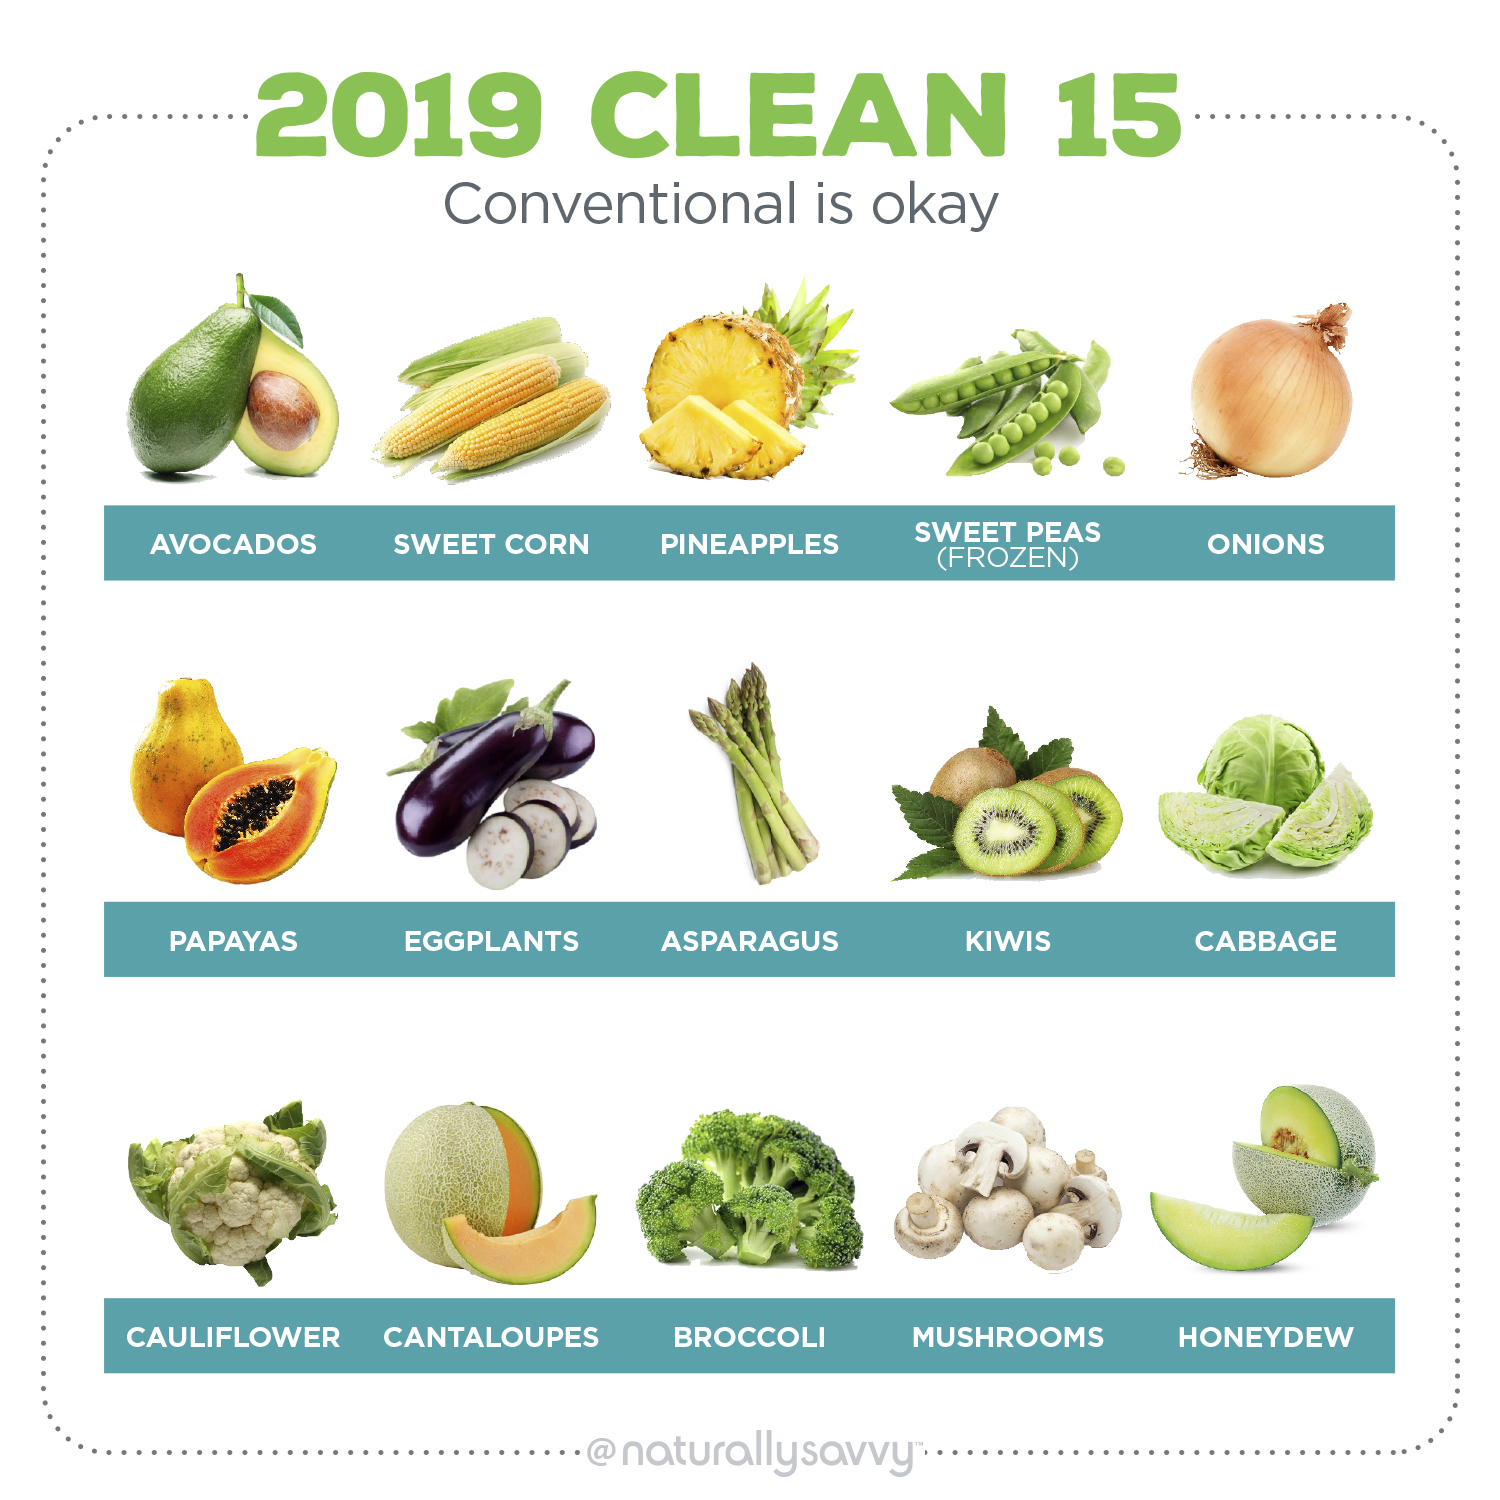 2019 Dirty Dozen and Clean 15 EWG Lists Are Out!